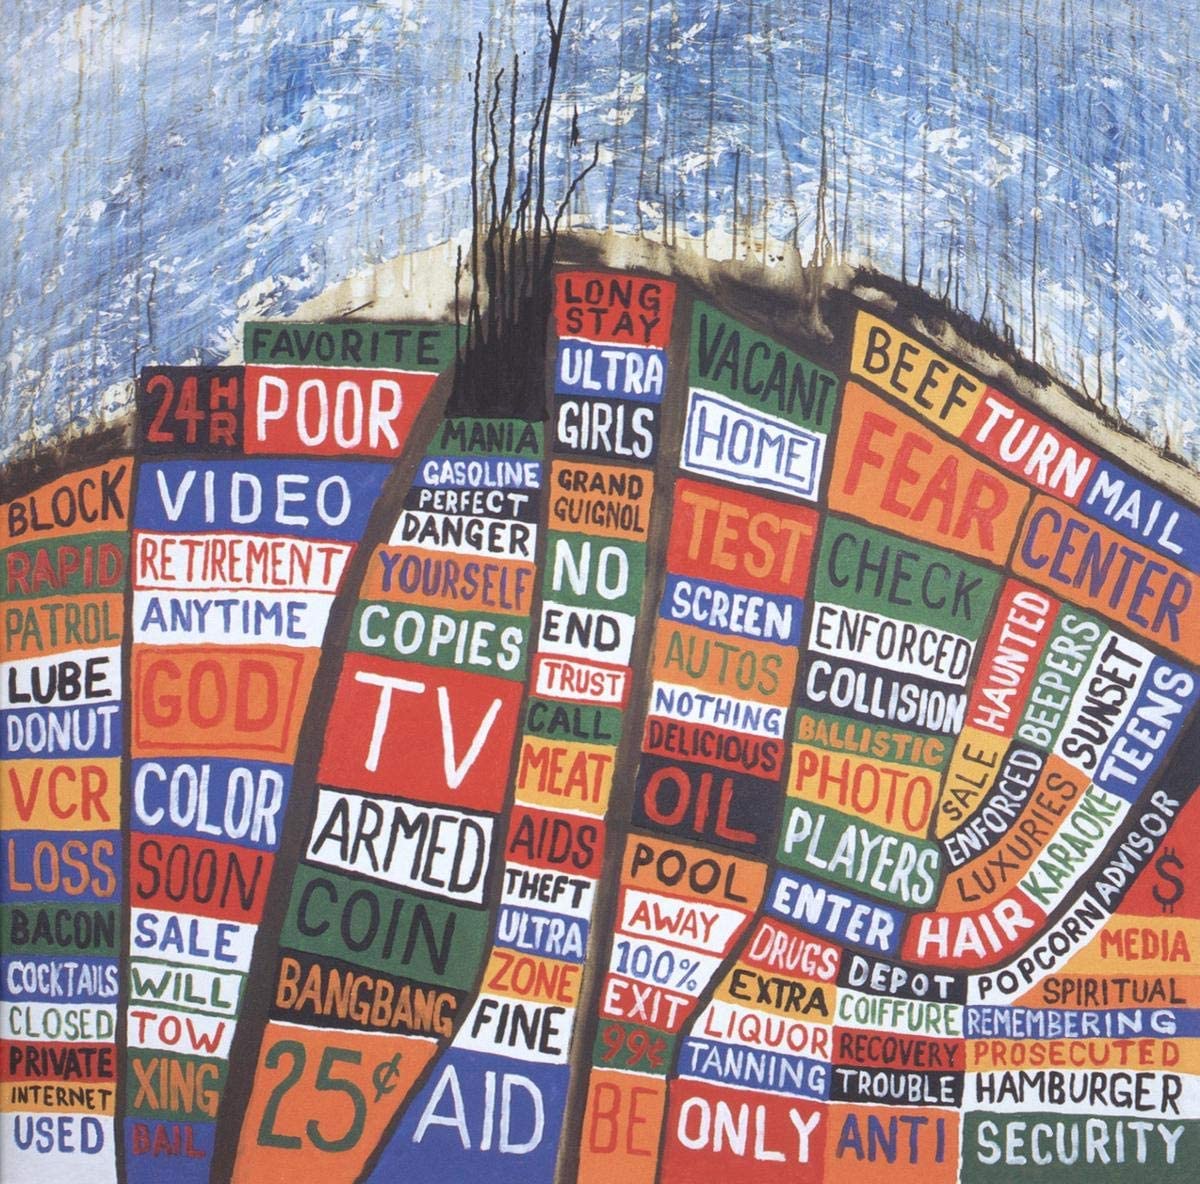 6th studio album on Vinyl by Radiohead, originally released in 2003, Hail to the Thief was seen as a return to alternative rock, drawing it's sound from every era of the band's existence.